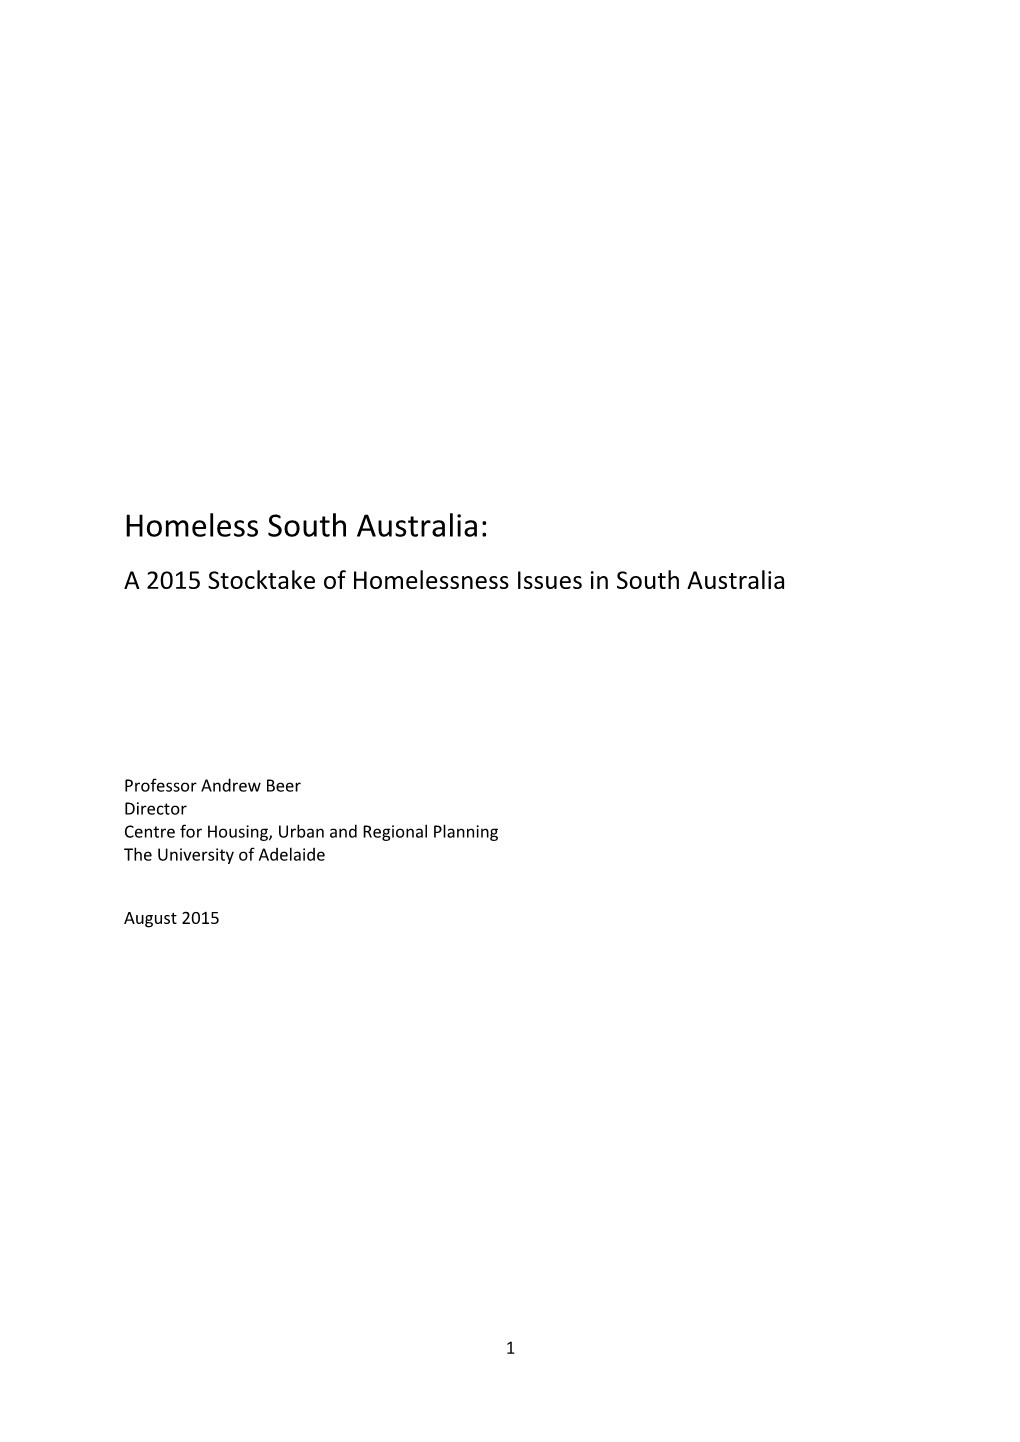 A 2015 Stocktake of Homelessness Issues in South Australia